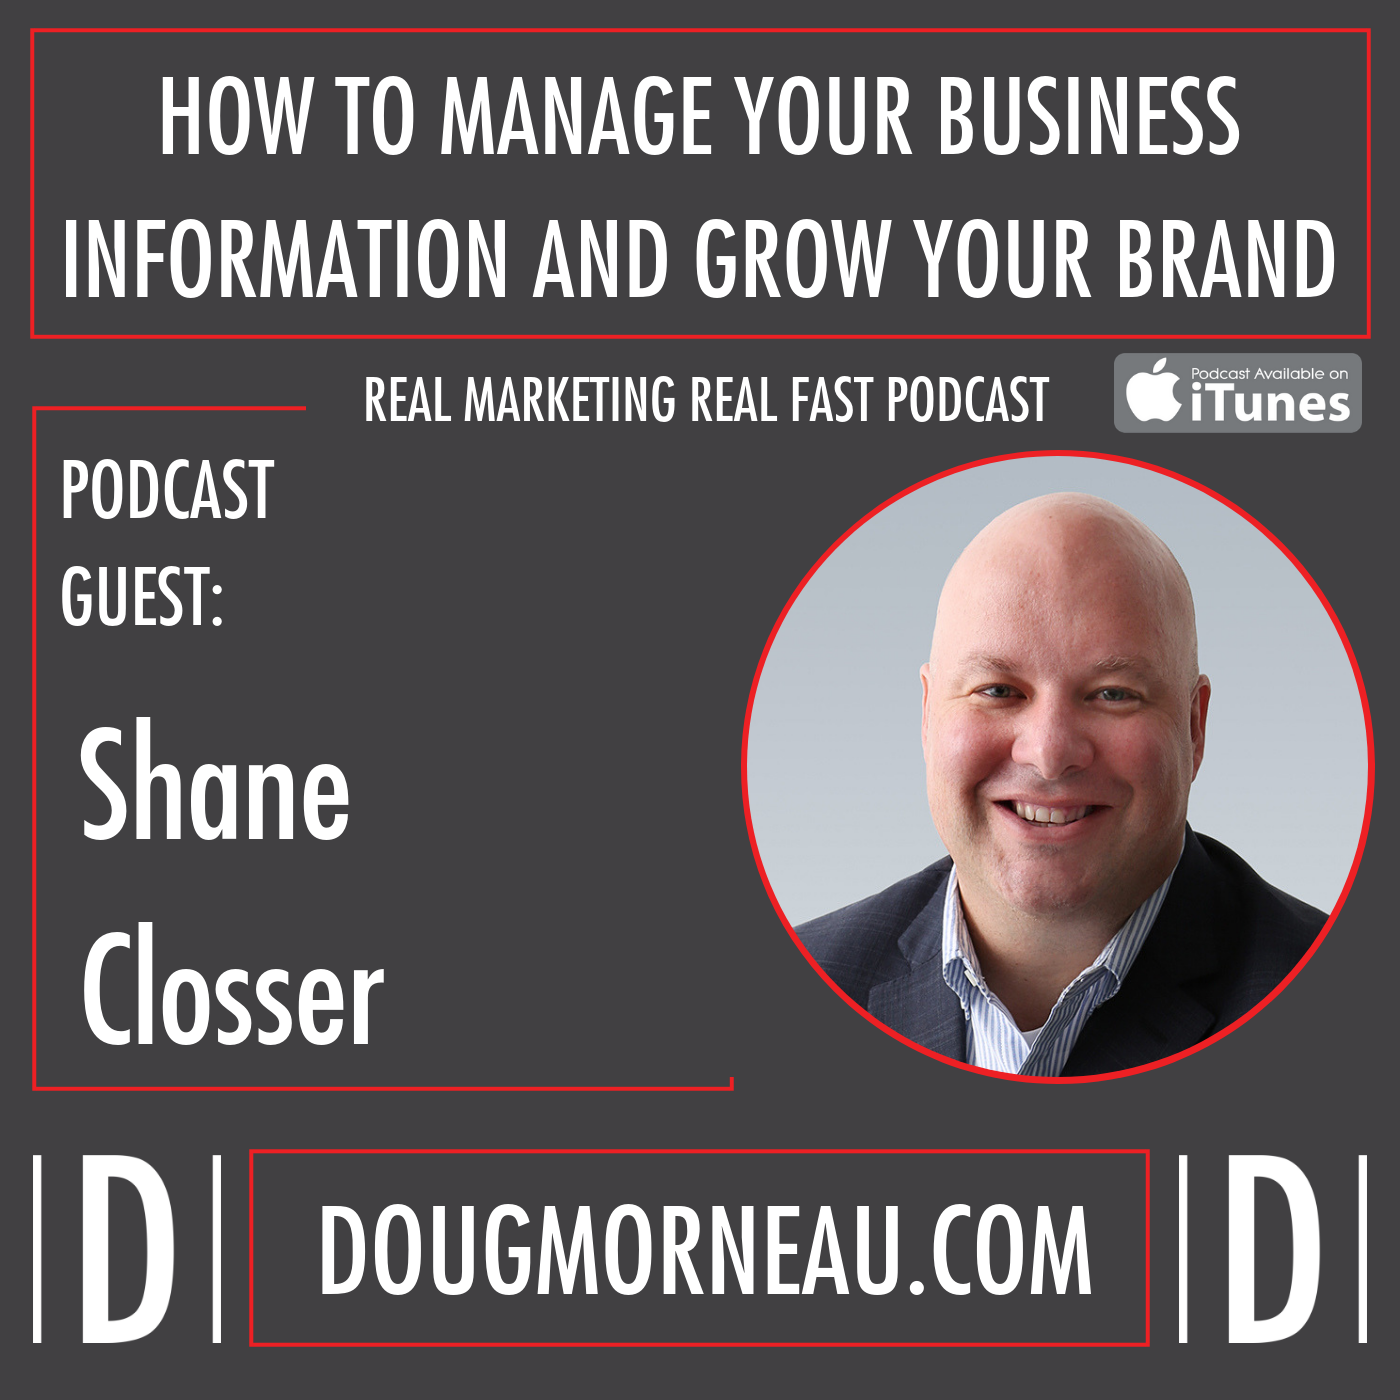 HOW TO MANAGE YOUR BUSINESS INFORMATION AND GROW YOUR BRAND SHANE CLOSSER - DOUG MORNEAU - REAL MARKETING REAL FAST PODCAST